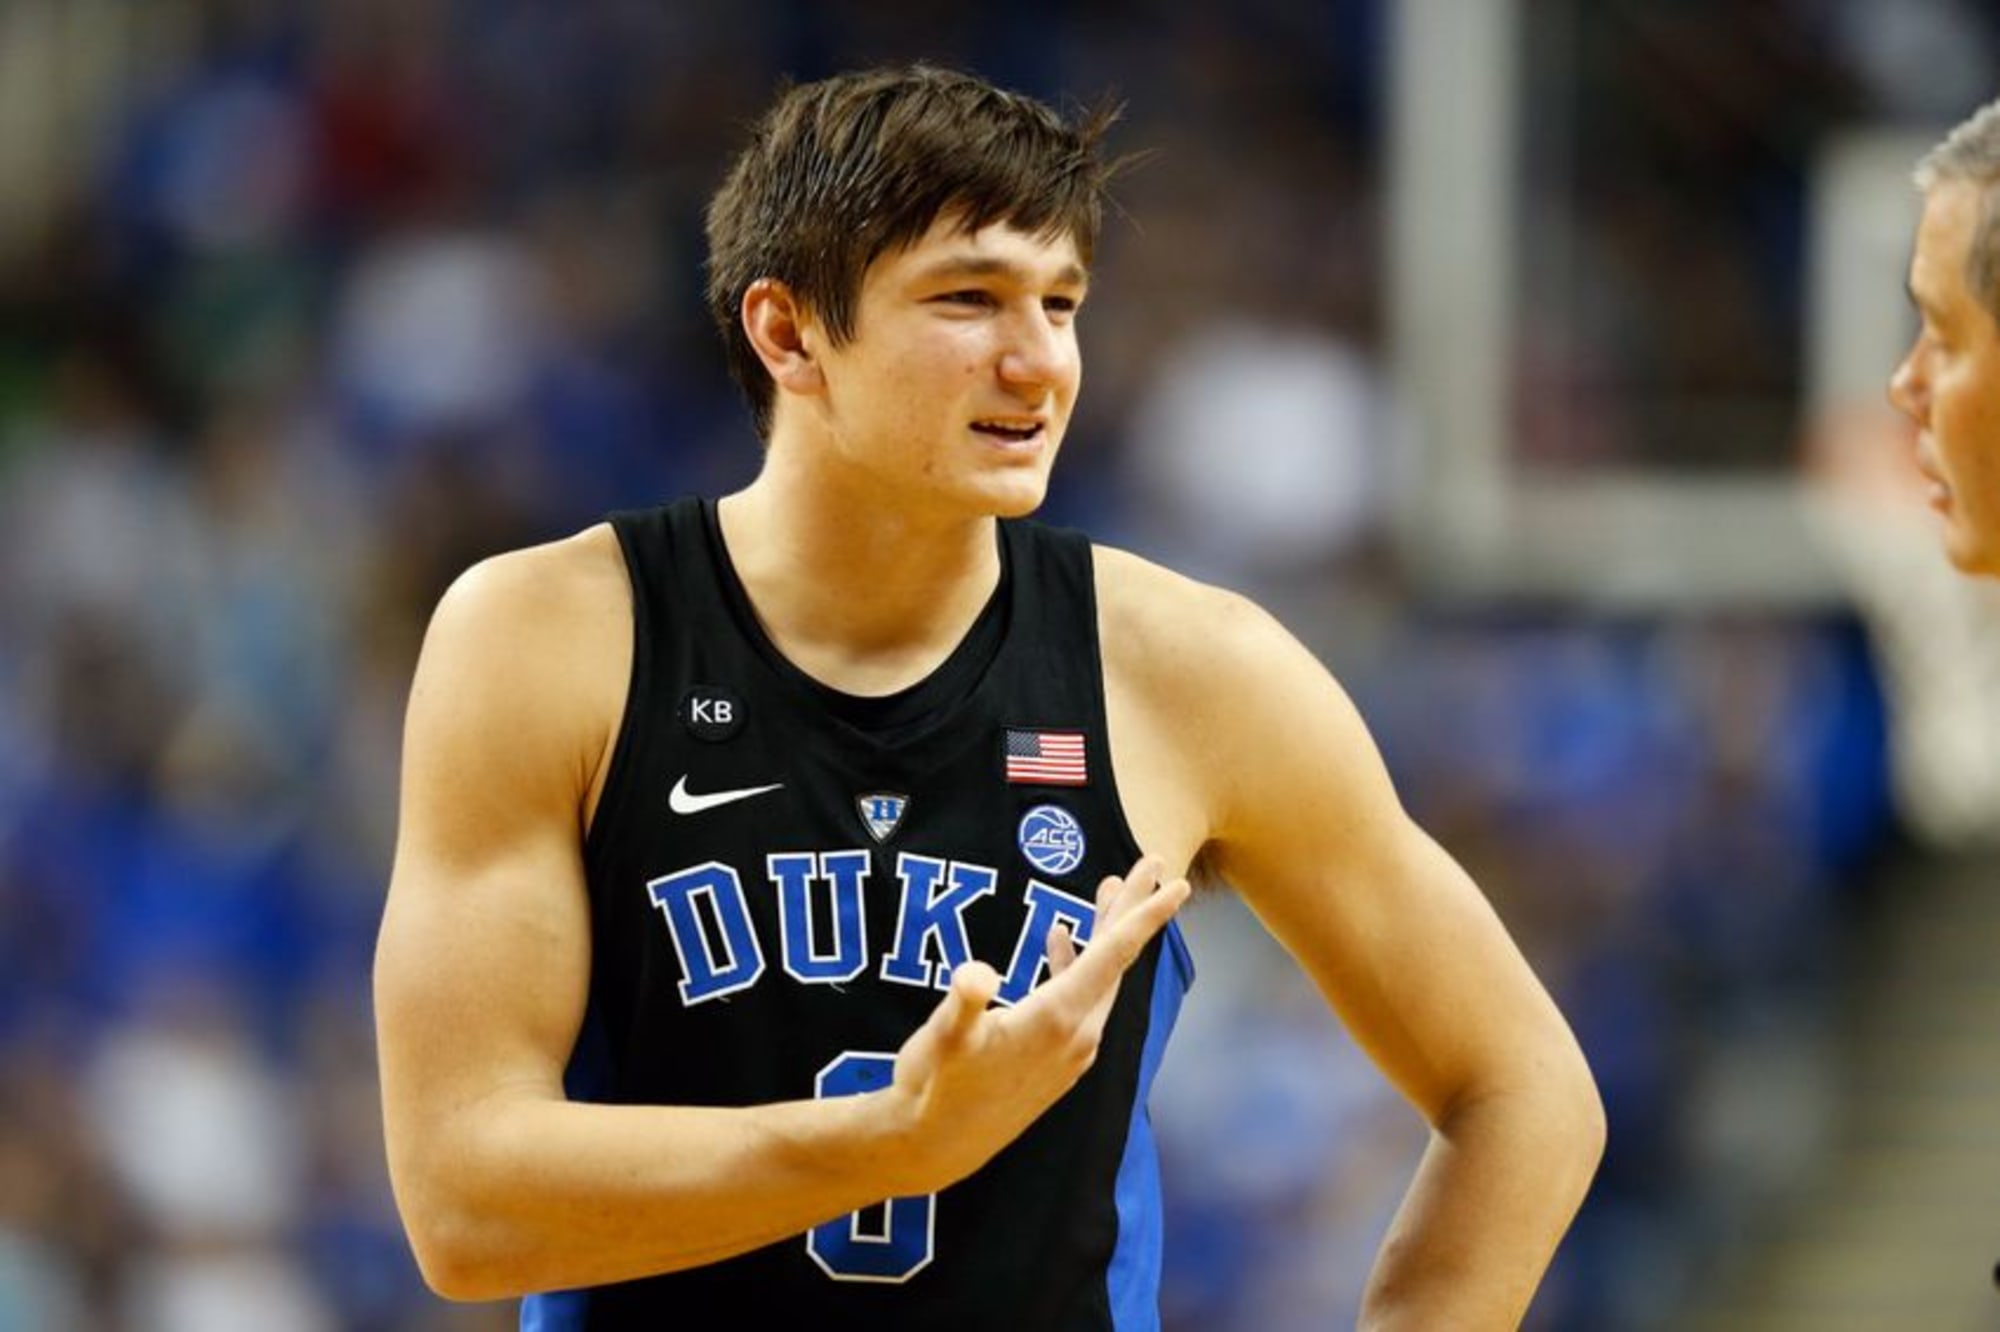 Duke basketball: Grayson Allen asked about tripping incidents, again